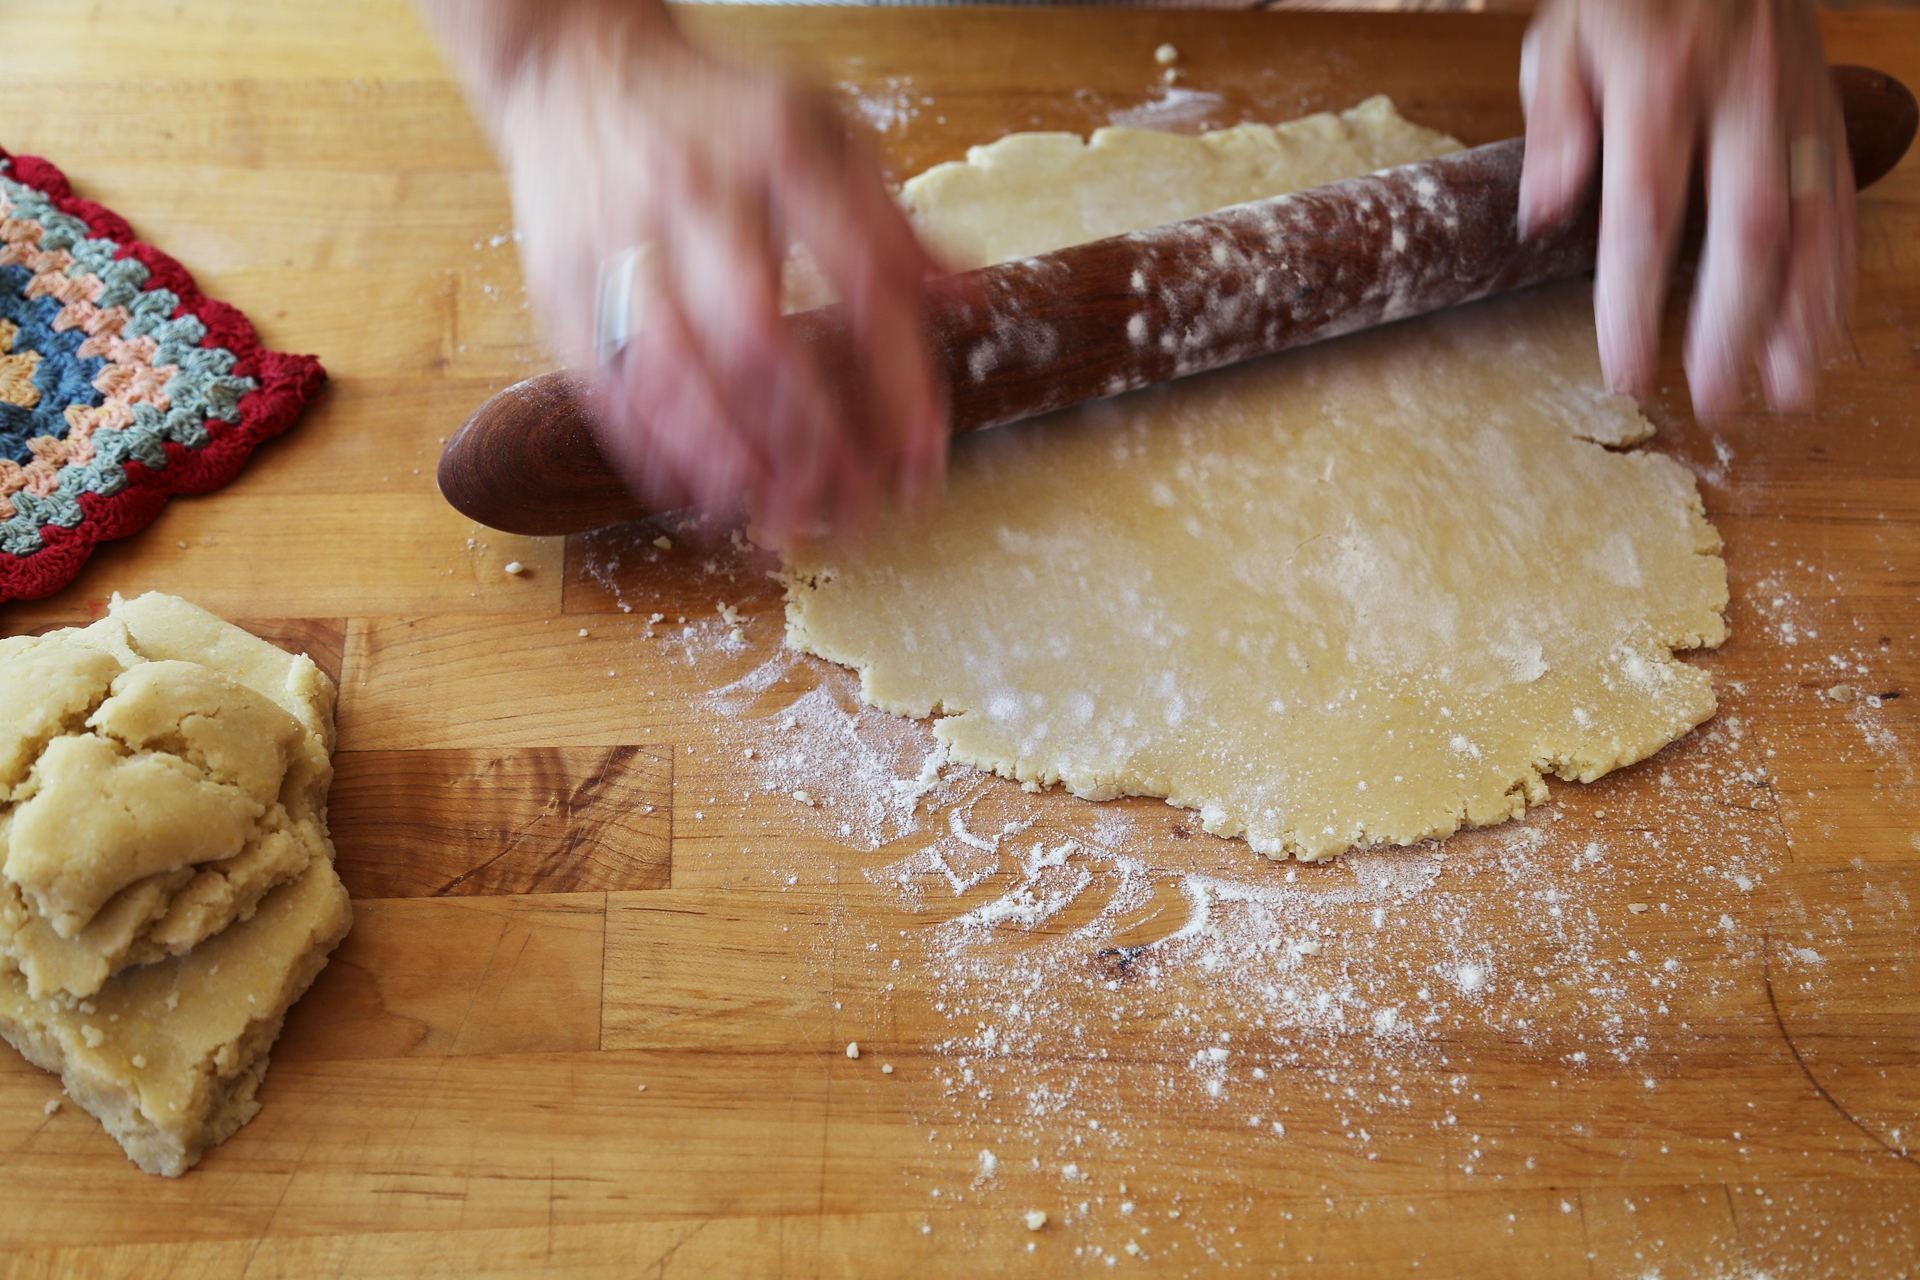 Roll out the dough into a round about 1/8 inch thick.